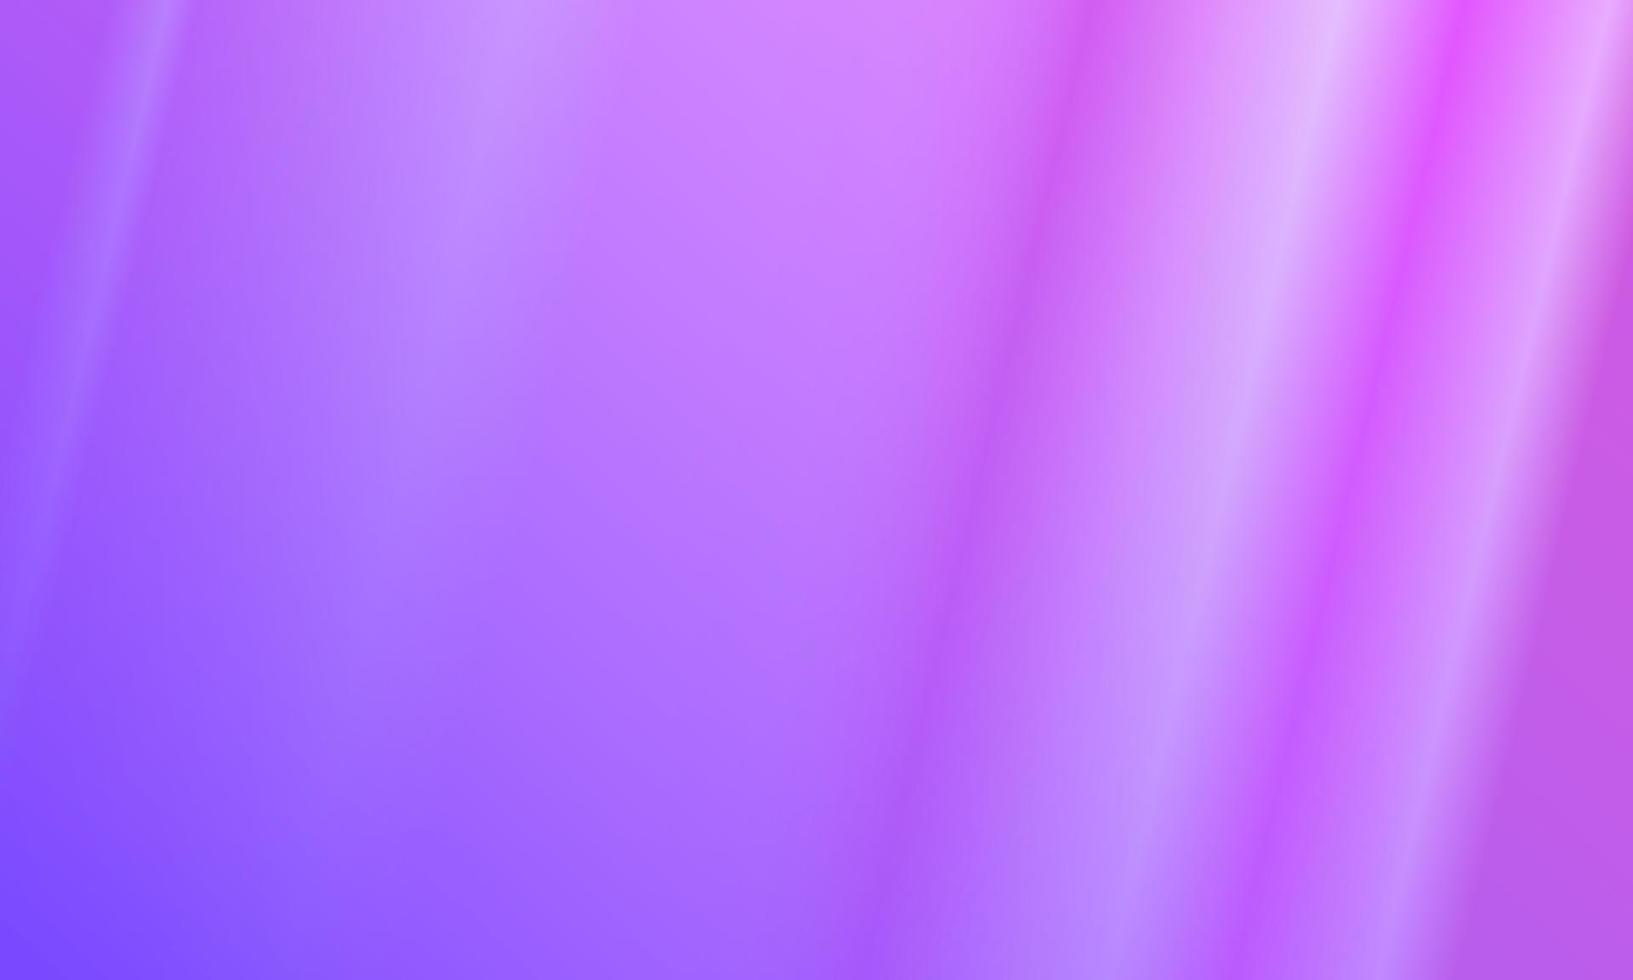 blue and purple gradient abstract background with shining. suitable for wallpaper, banner or flyer vector